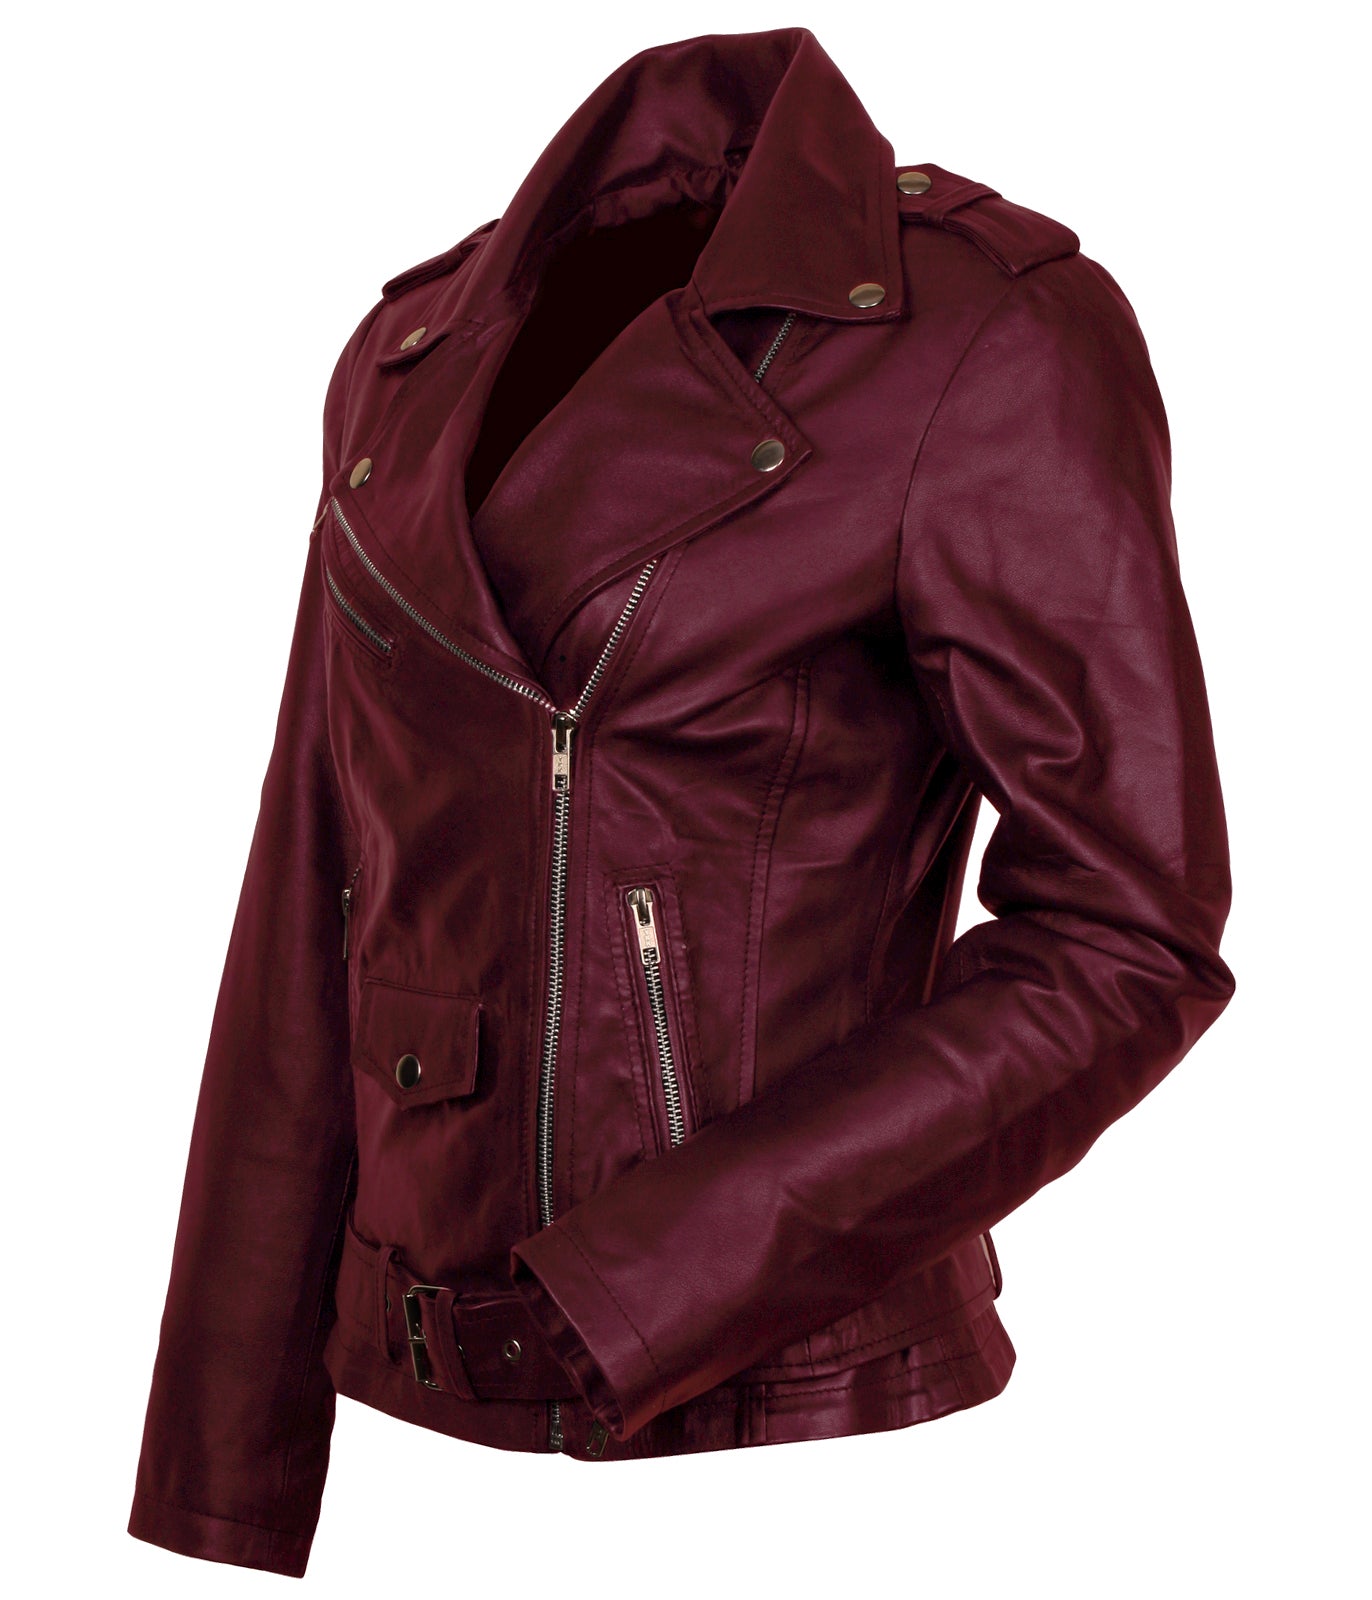 burgundy leather and sneakers. | Leather jacket outfits, Burgundy jacket  outfit, Jacket outfits